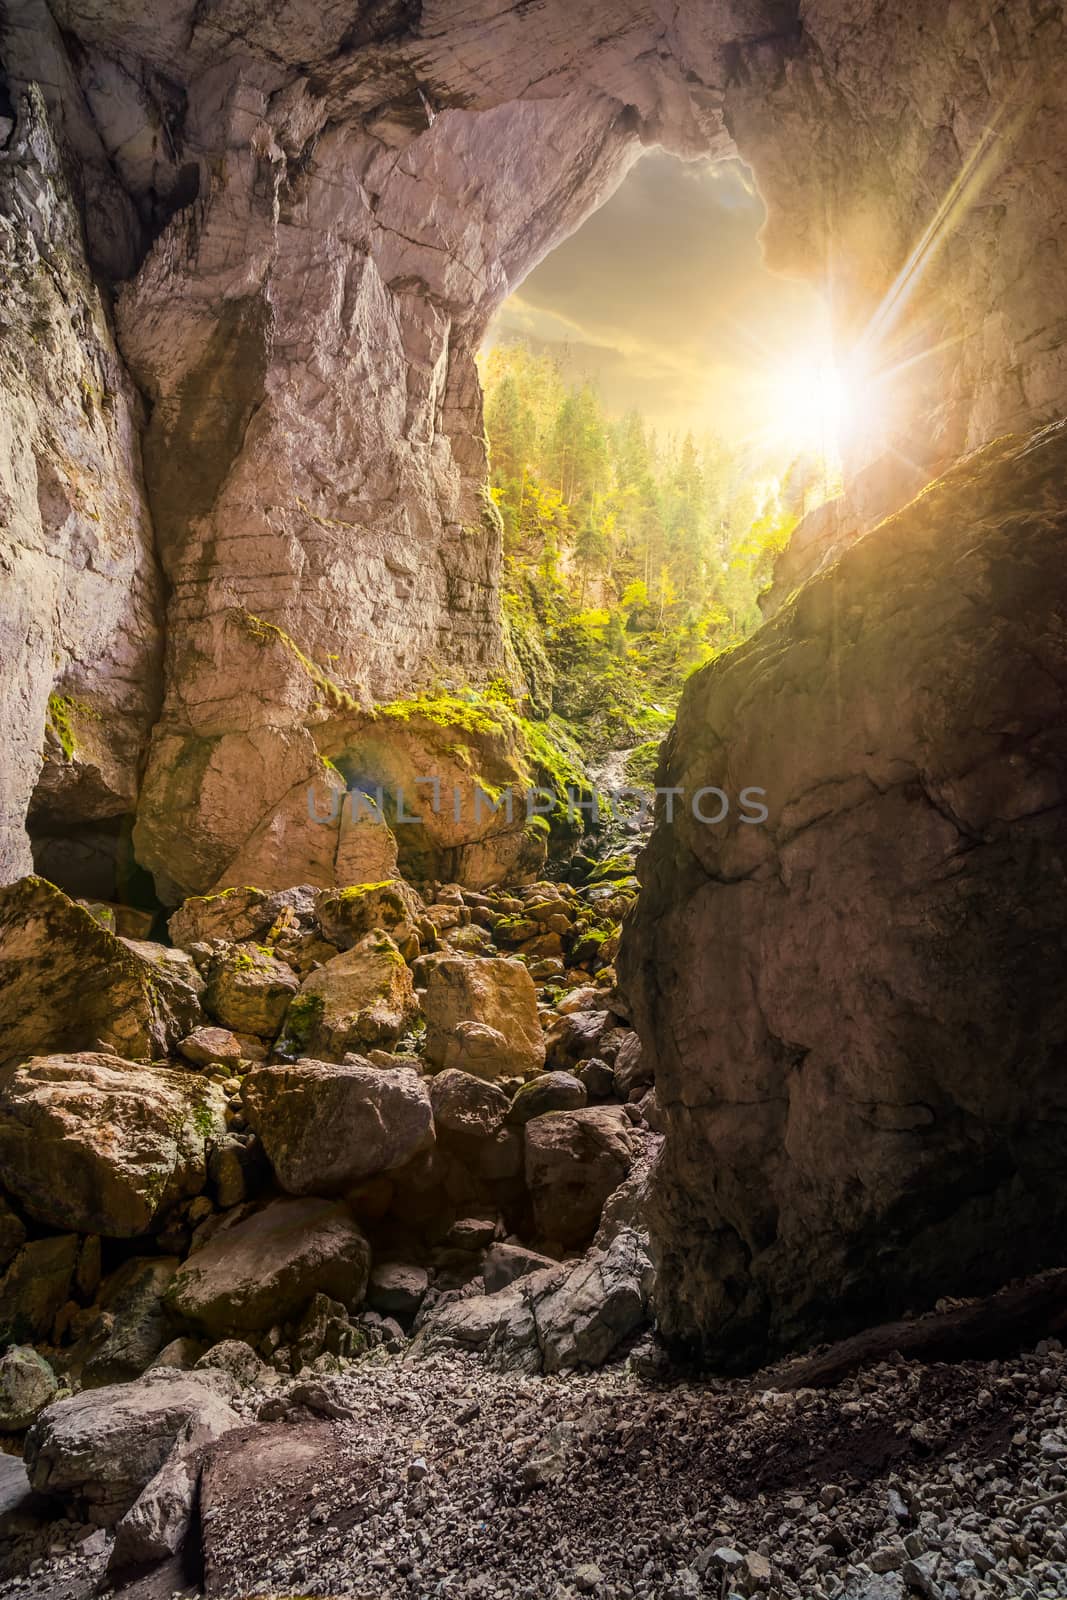 Cetatile cave in romania. Natural citadel sculpted by river in romanian mountains in evening light